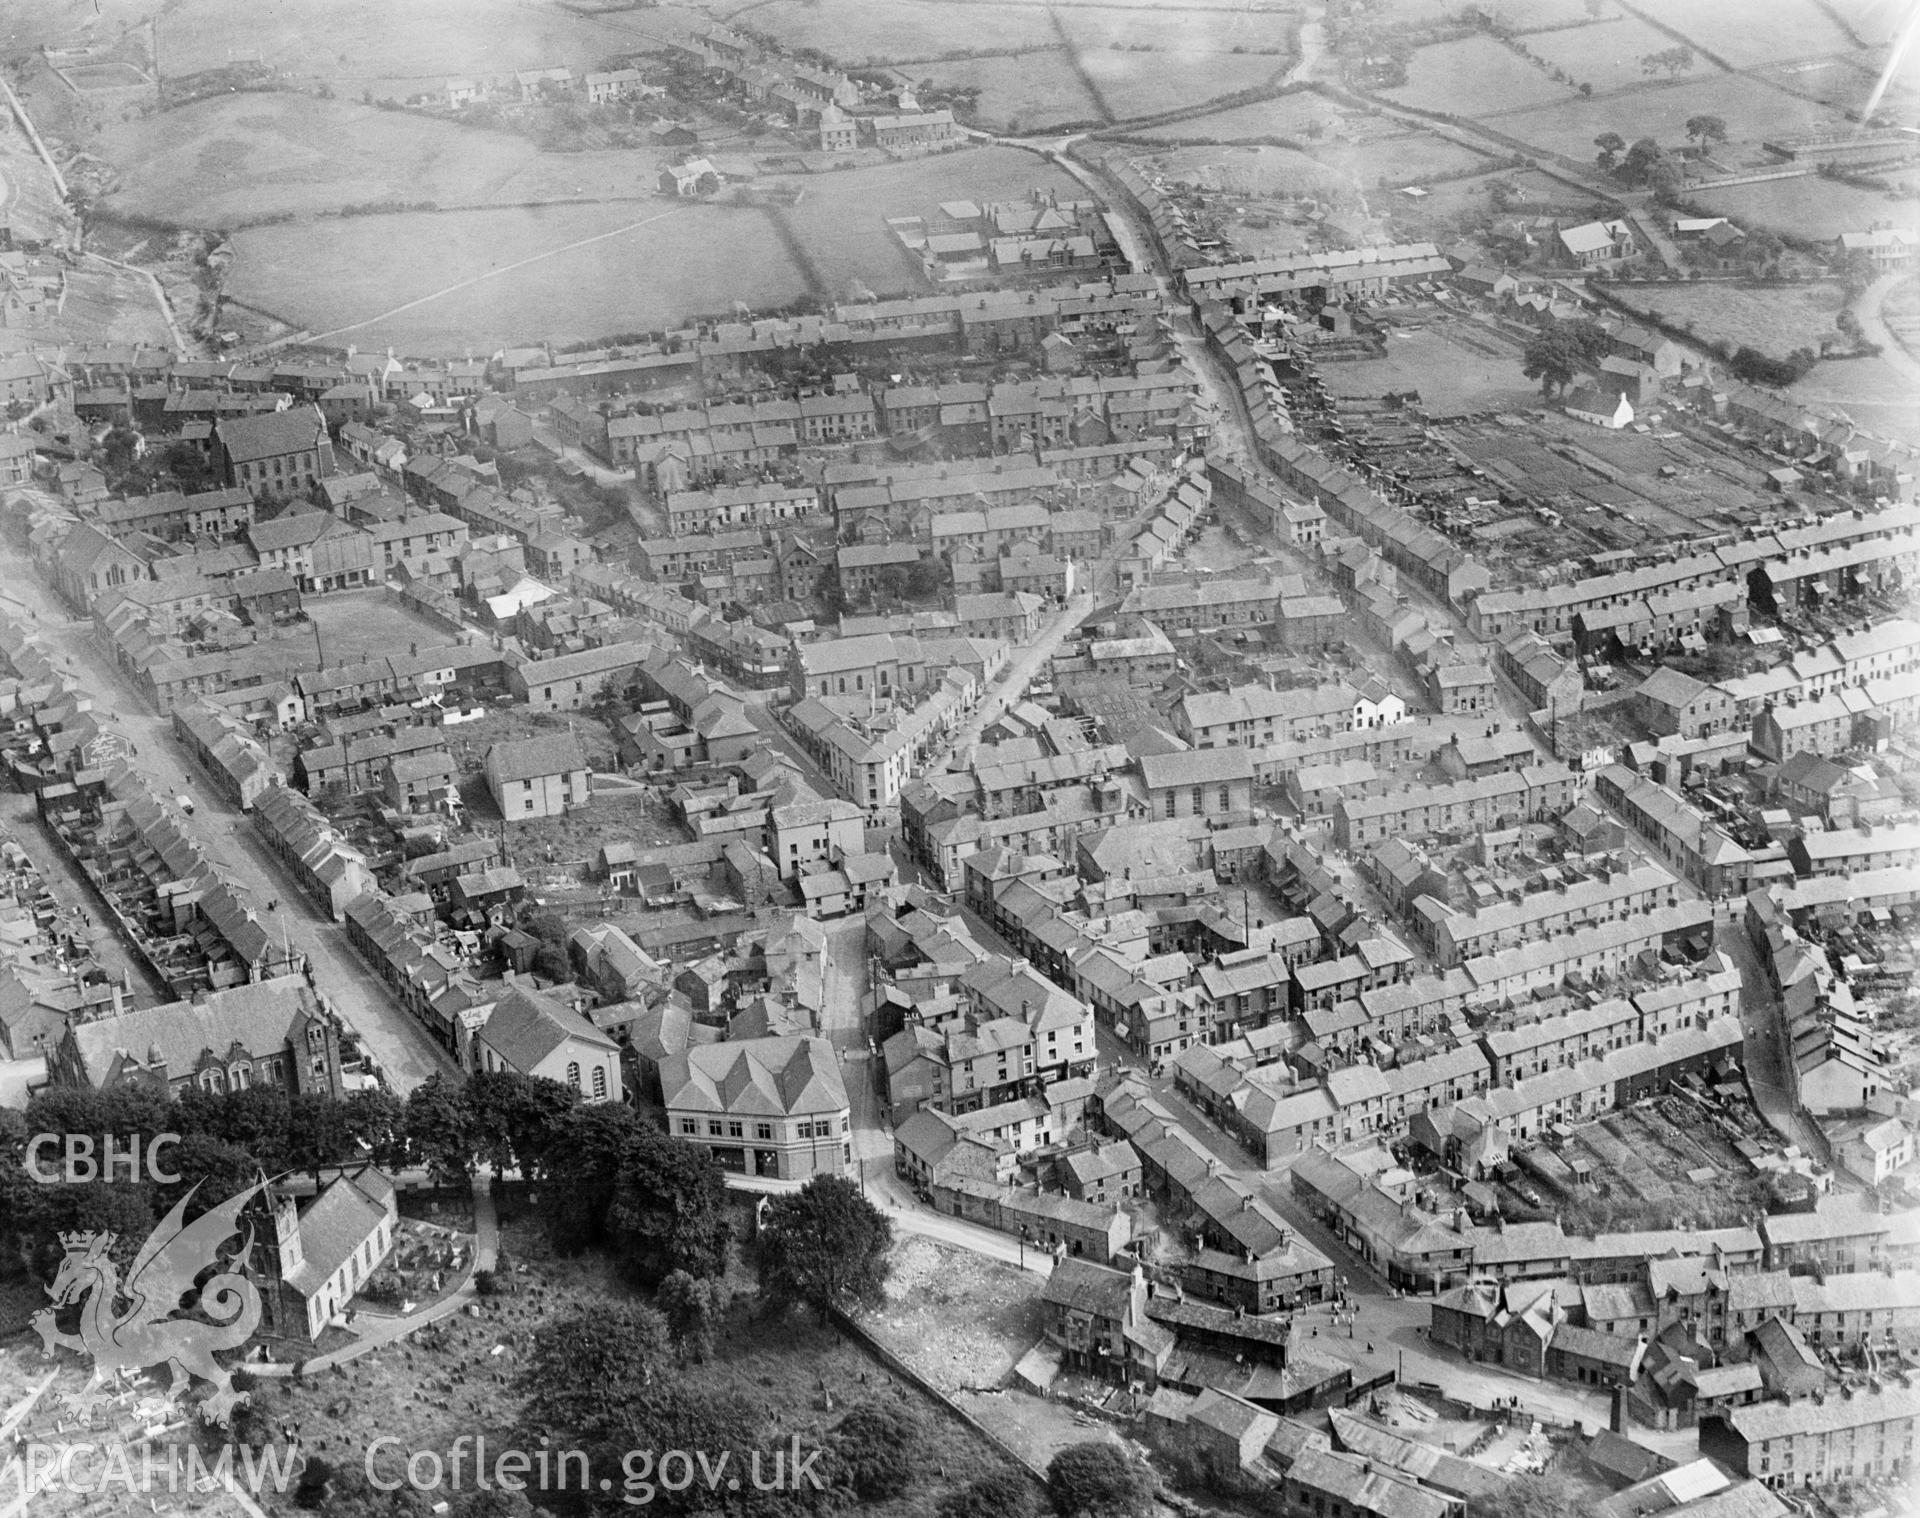 General view of Blaenavon, oblique aerial view. 5?x4? black and white glass plate negative.